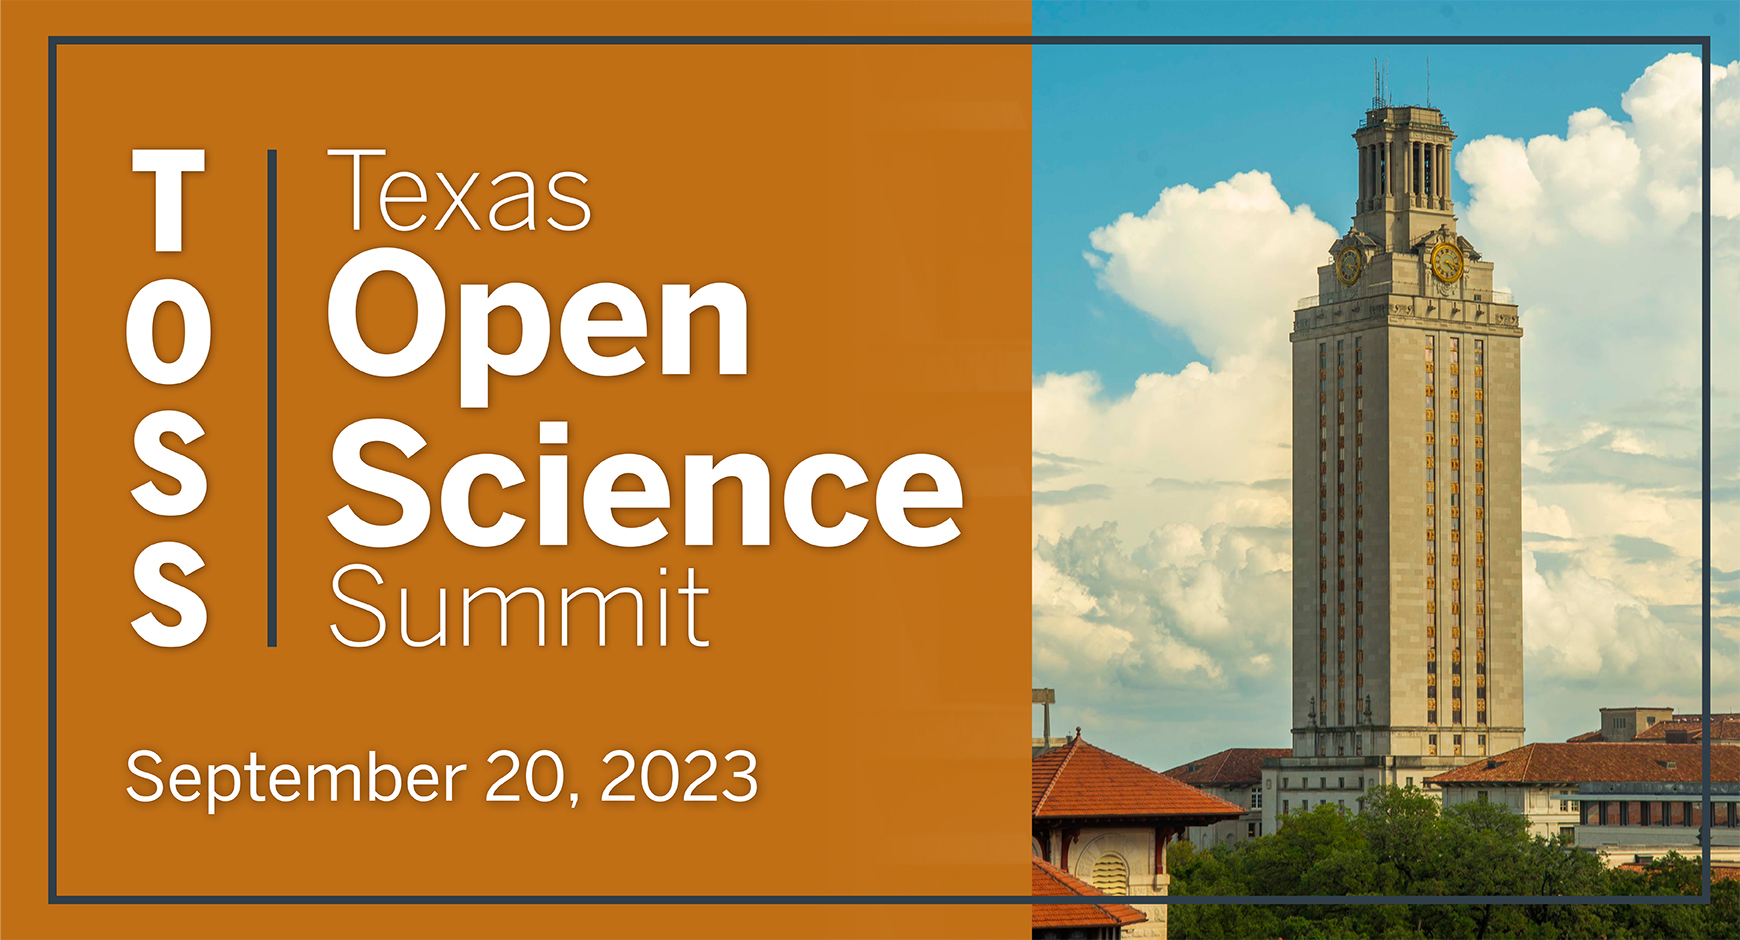 event graphic. orange field to left with texas open science summit in white and color image of the UT Tower on the right